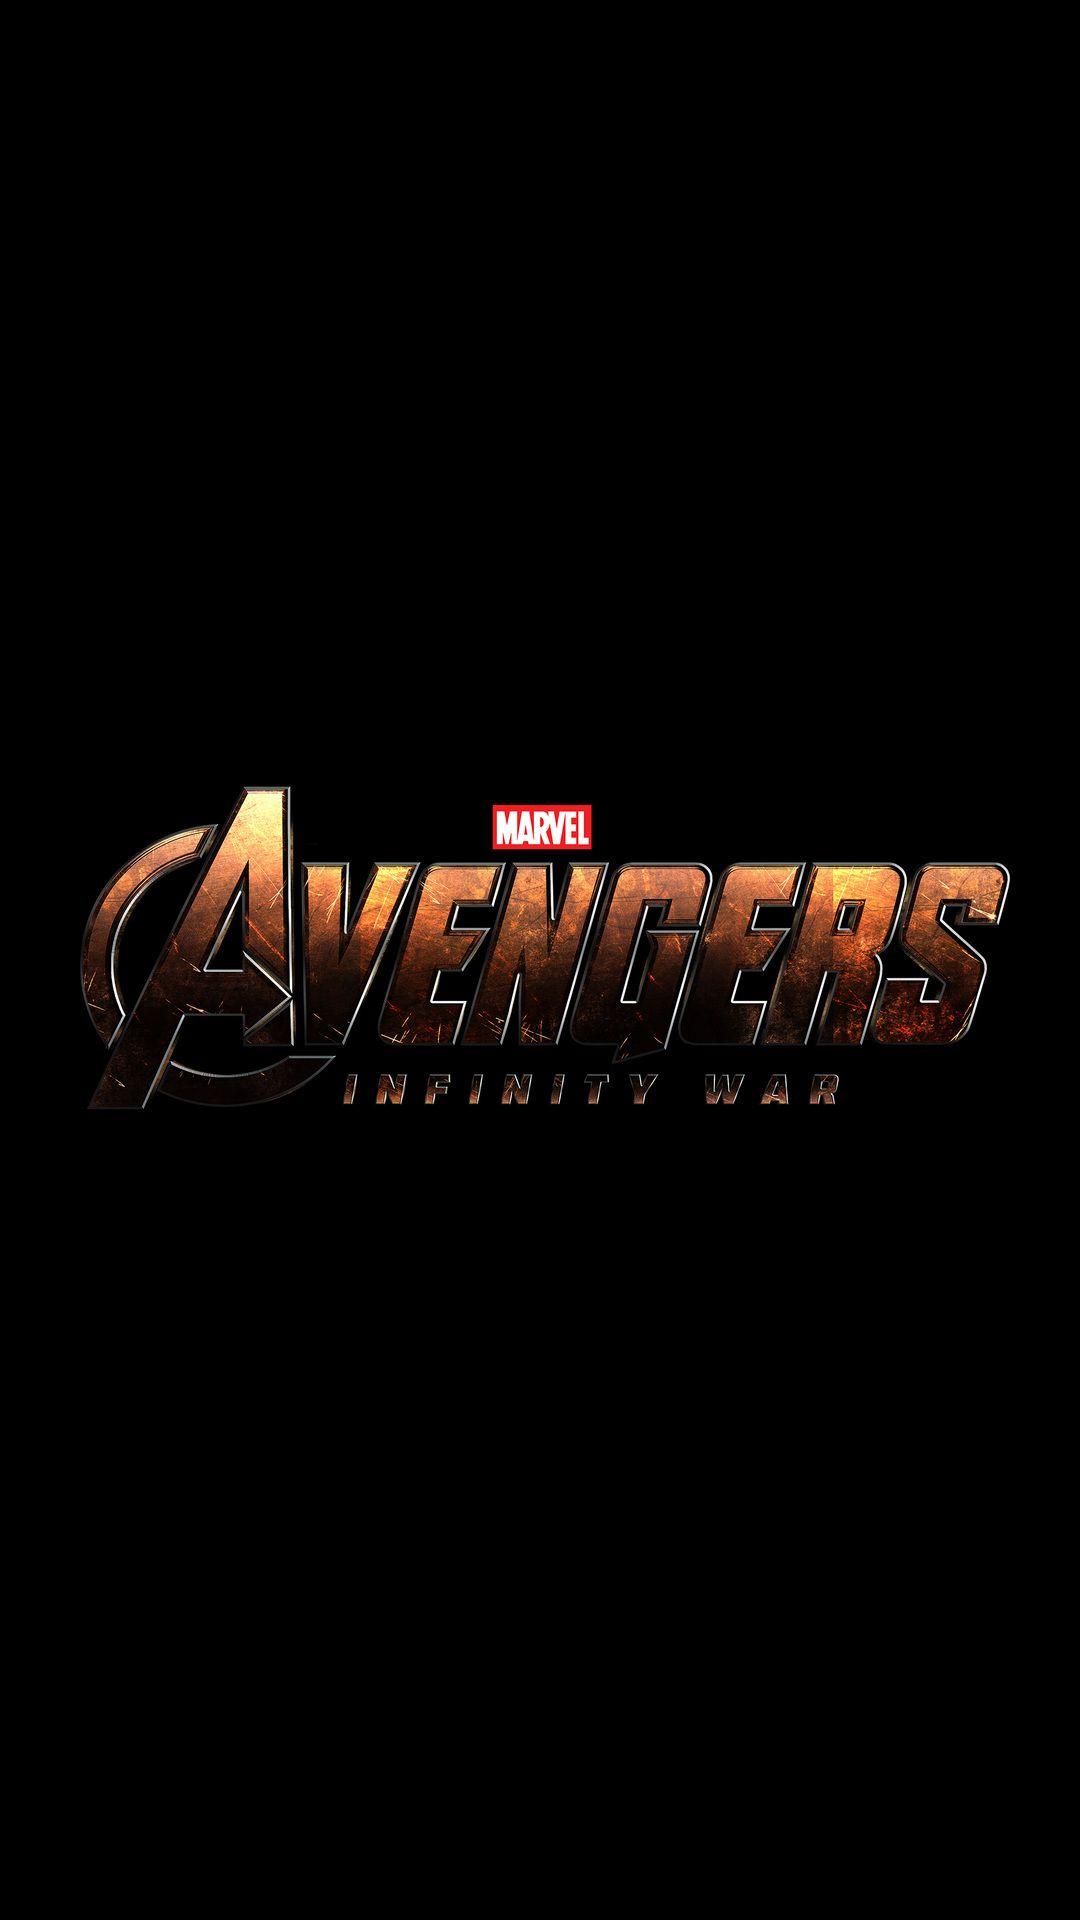 Avengers Infinity War logo htc one wallpaper, free and easy